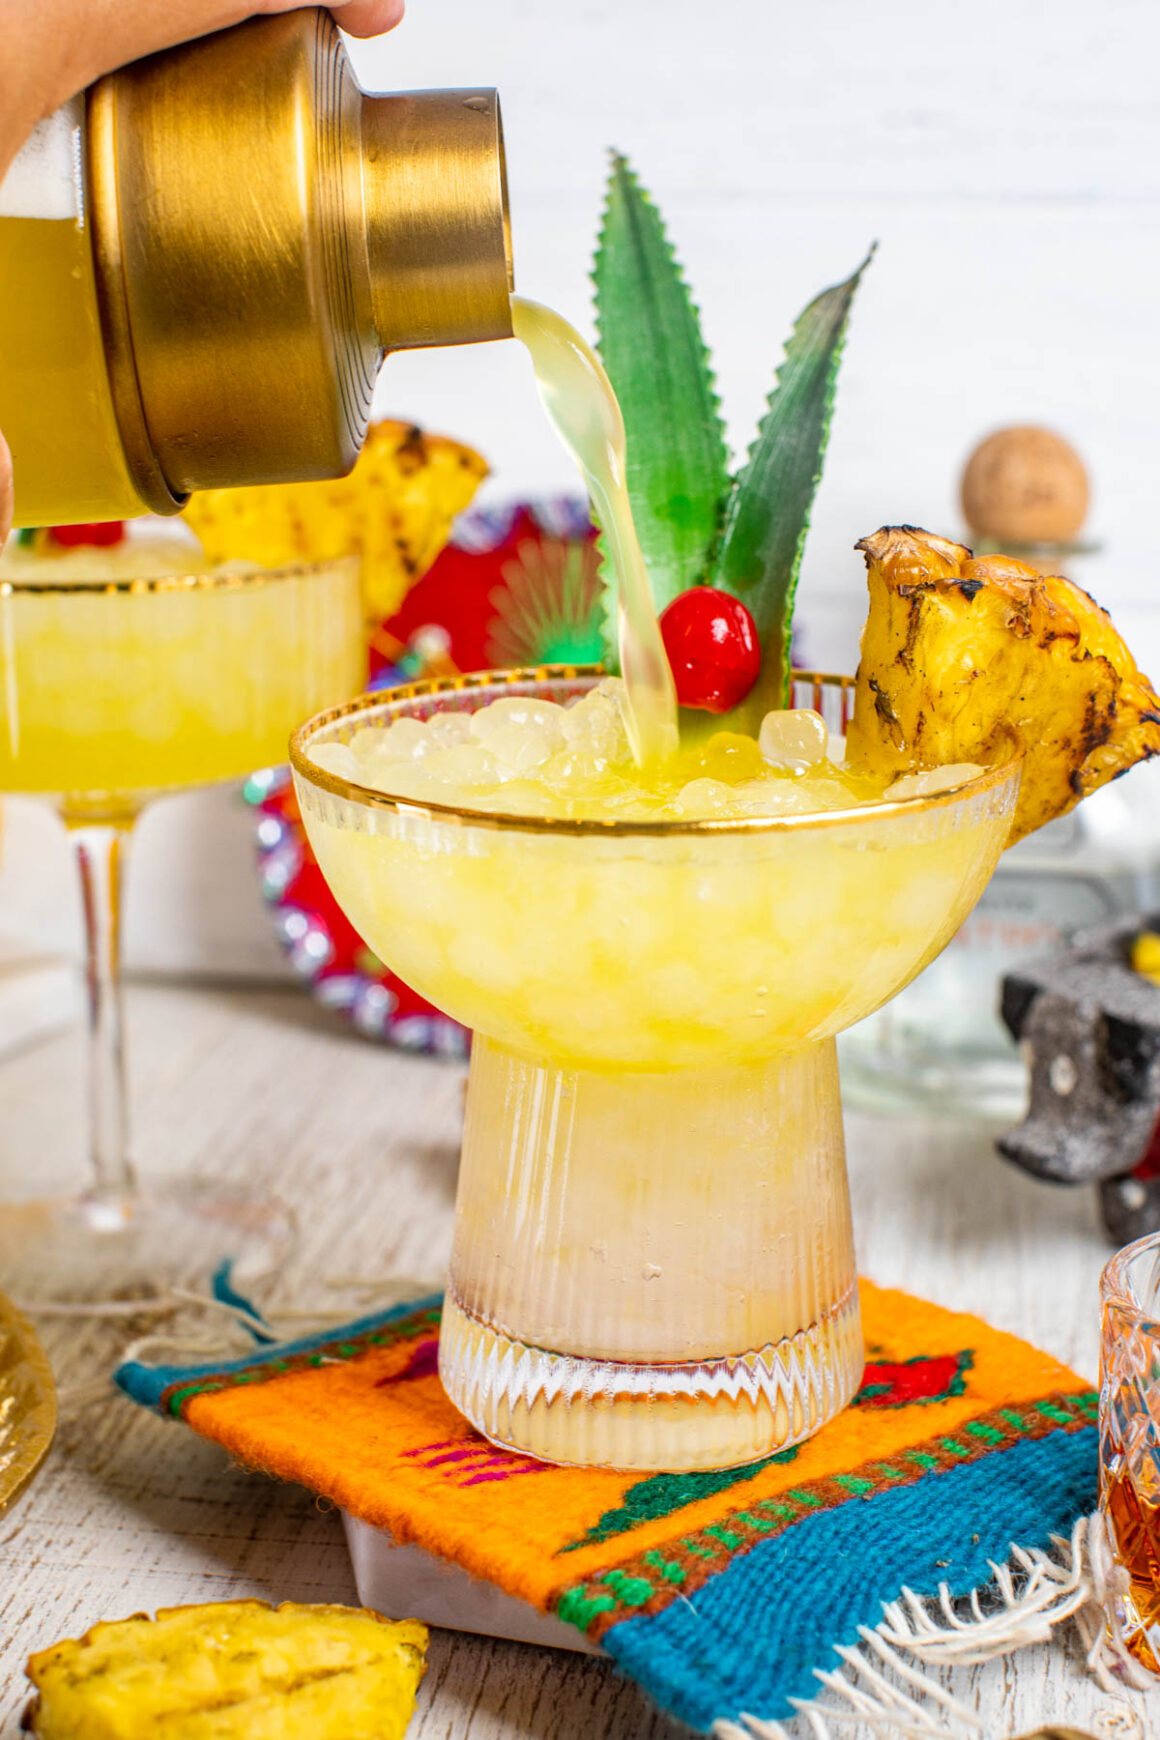 For this grilling season, you must prepare this amazing Grilled Pineapple Margarita Recipe that will make a good pairing with most BBQ dishes